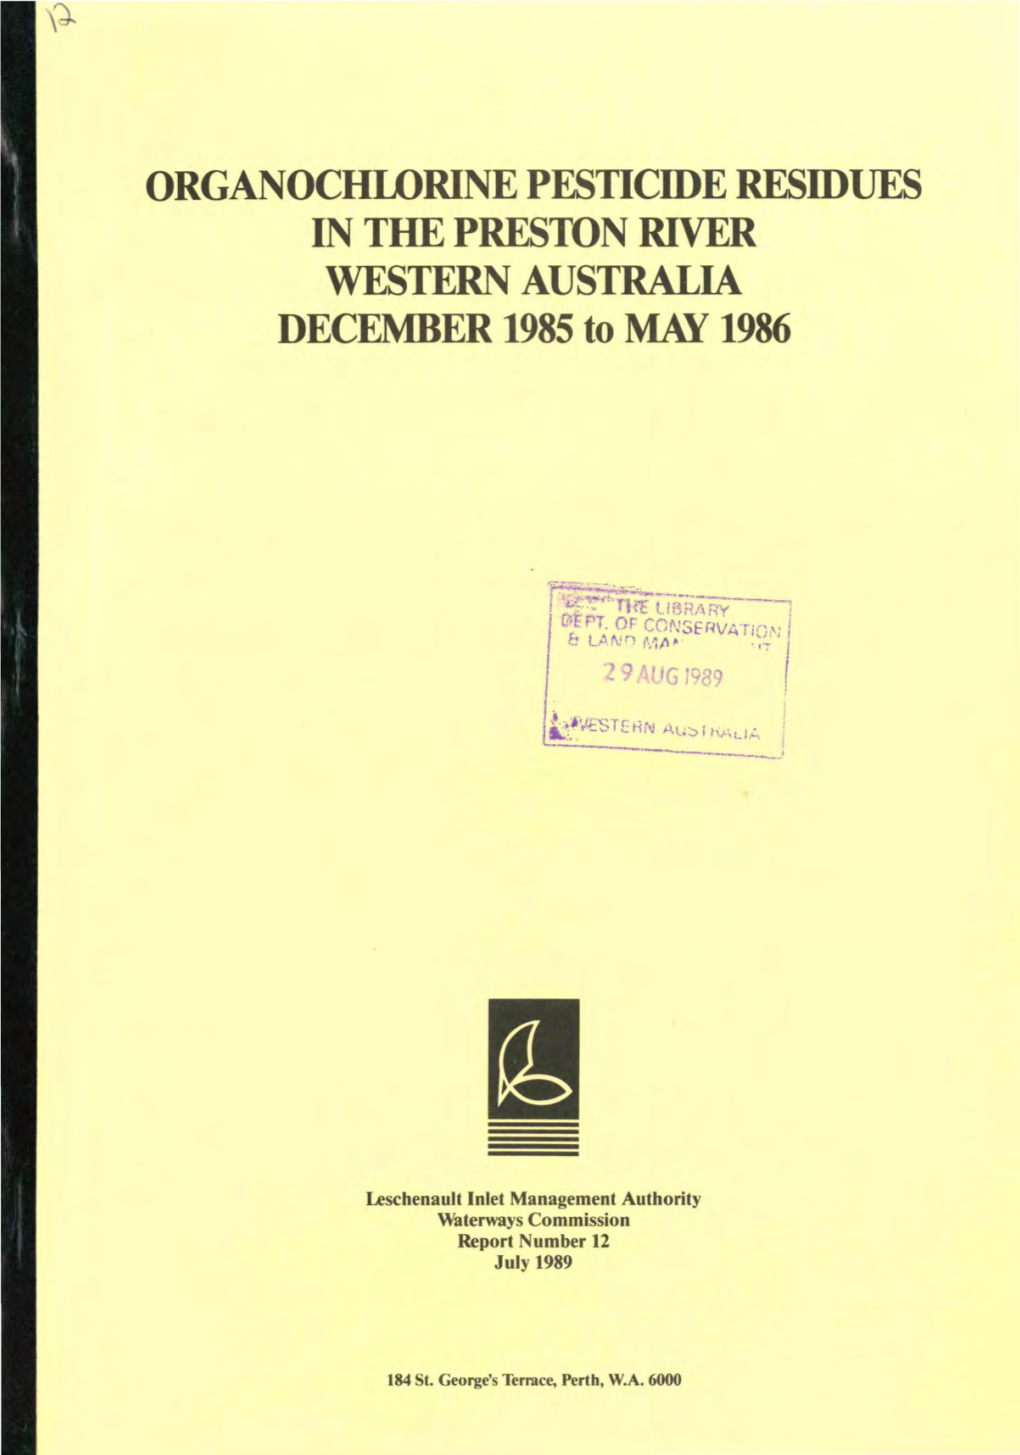 ORGANOCHWRINE PESTICIDE RESIDUES in the PRESTON RIVER WESTERN AUSTRALIA DECEMBER 1985 to MAY 1986